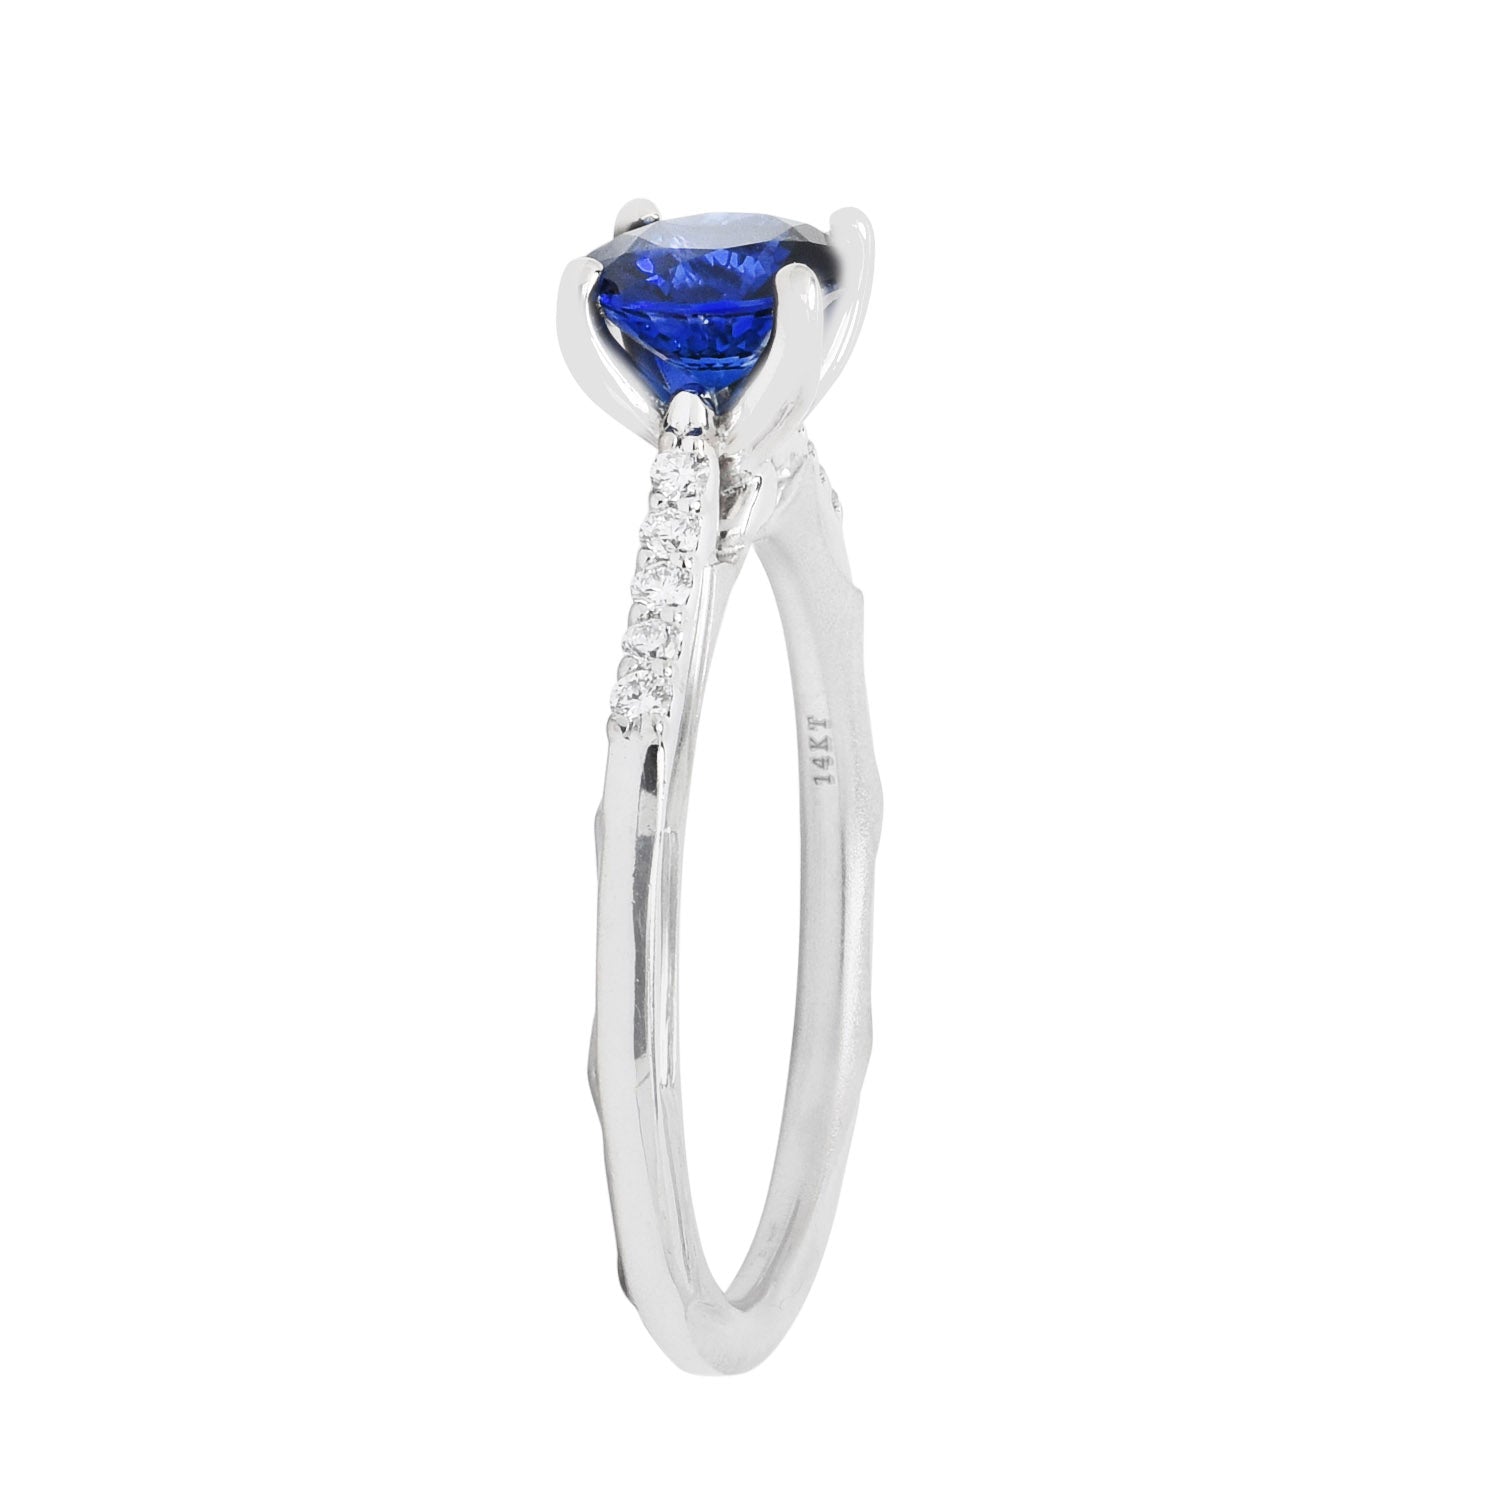 Sapphire Ring in 14kt White Gold with Diamonds (1/10ct tw)